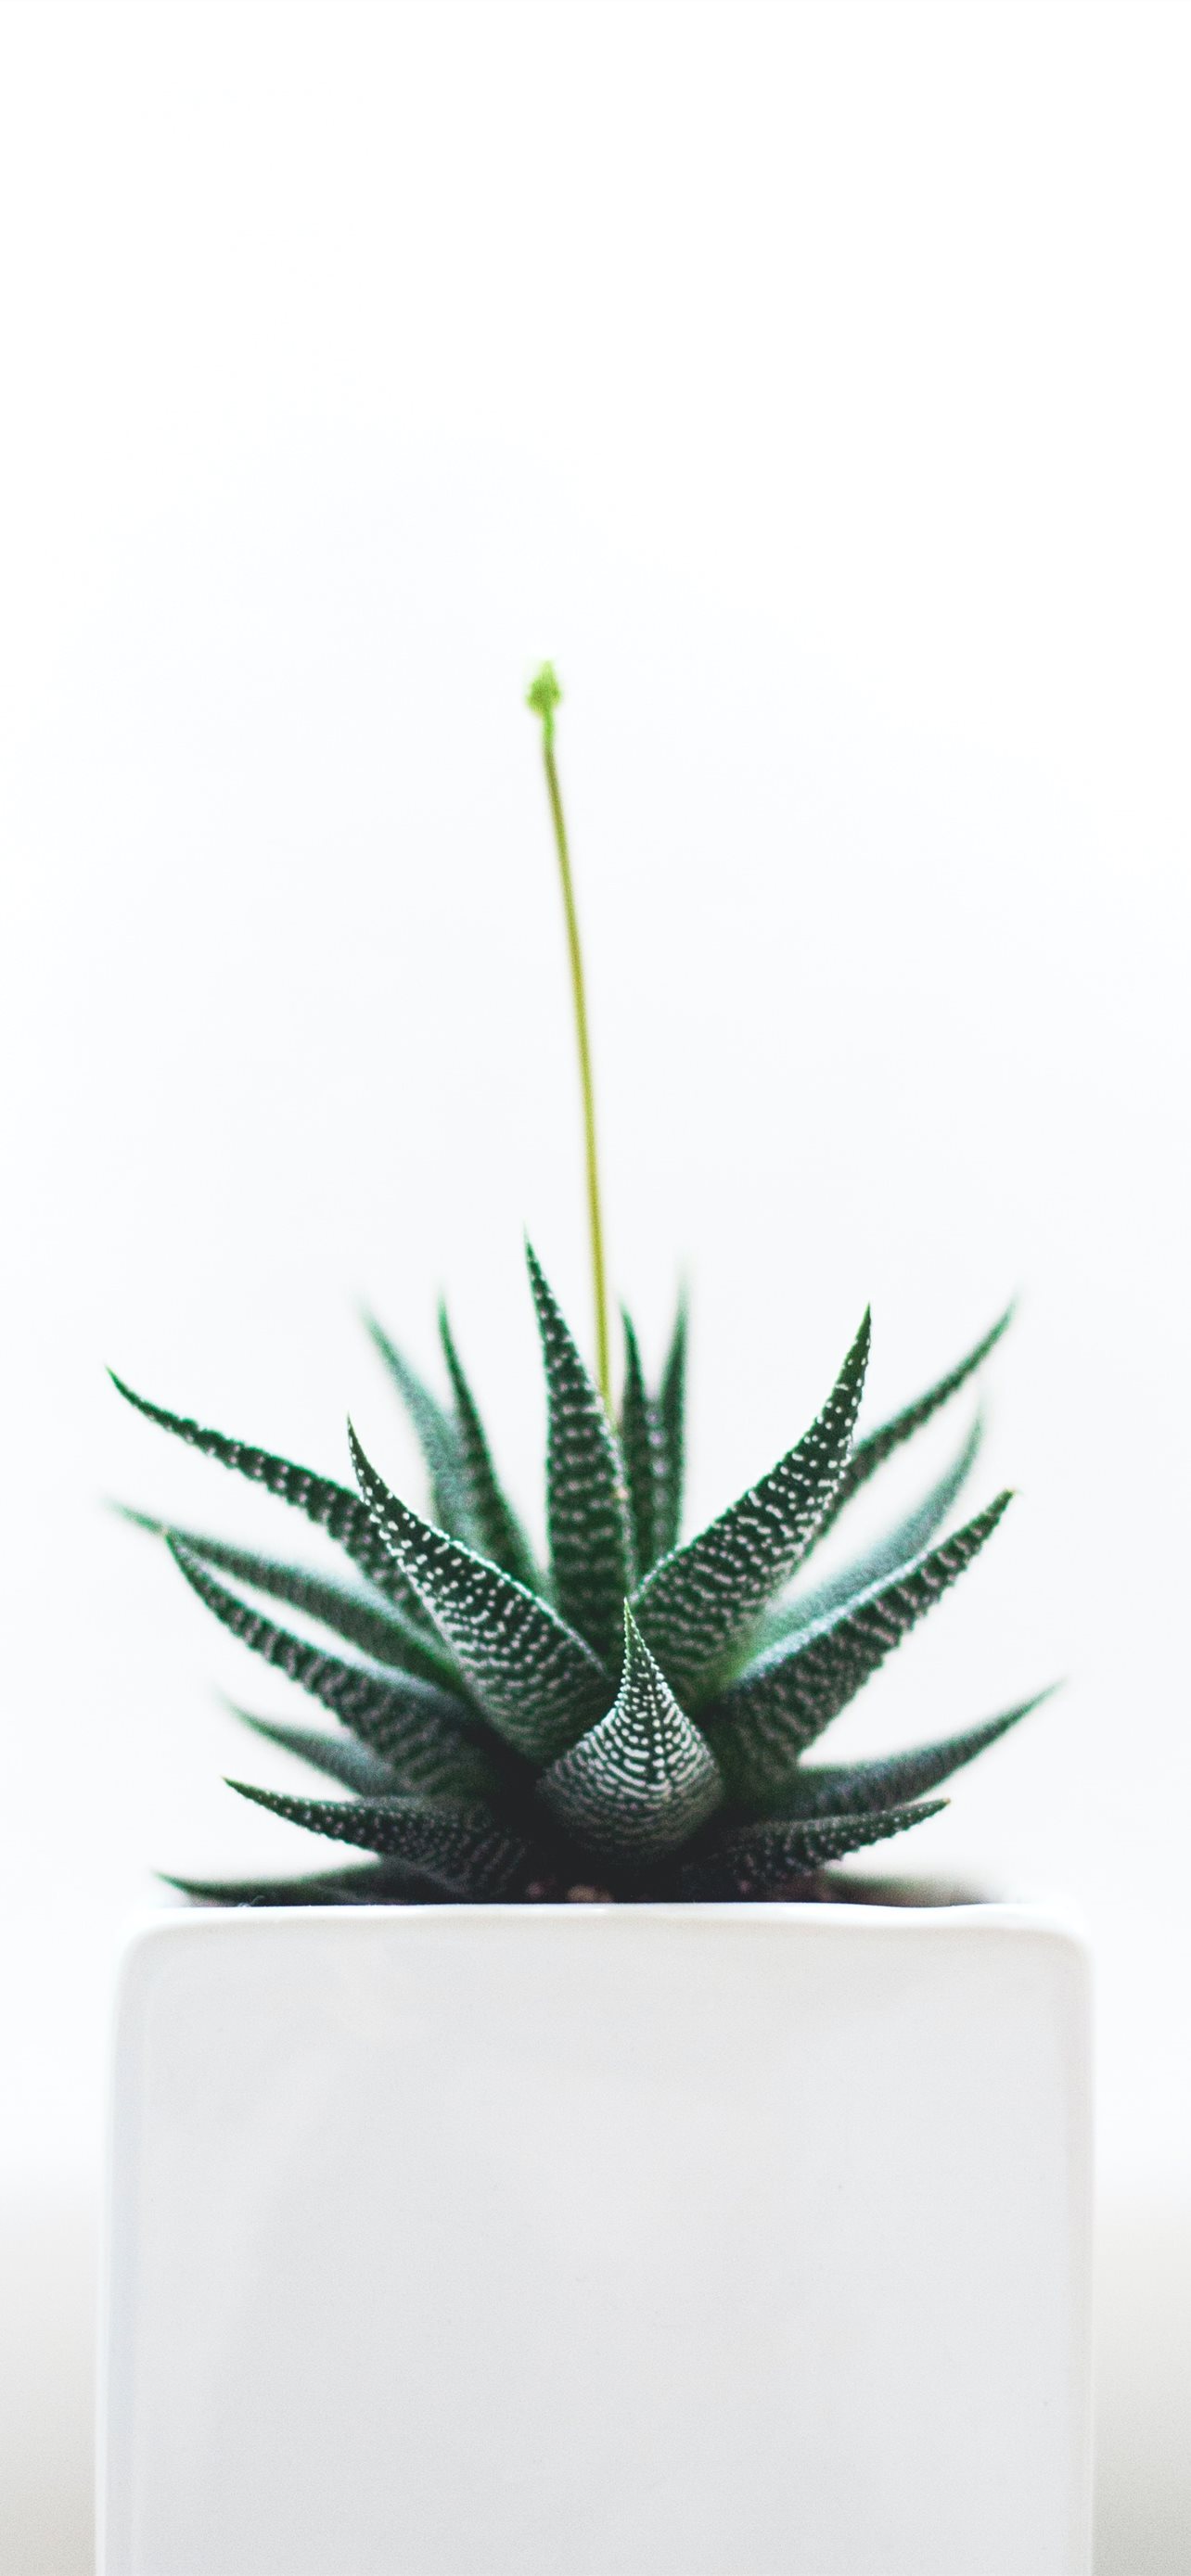 Aloe Vera plant on white vase iPhone 12 Wallpapers Free Download